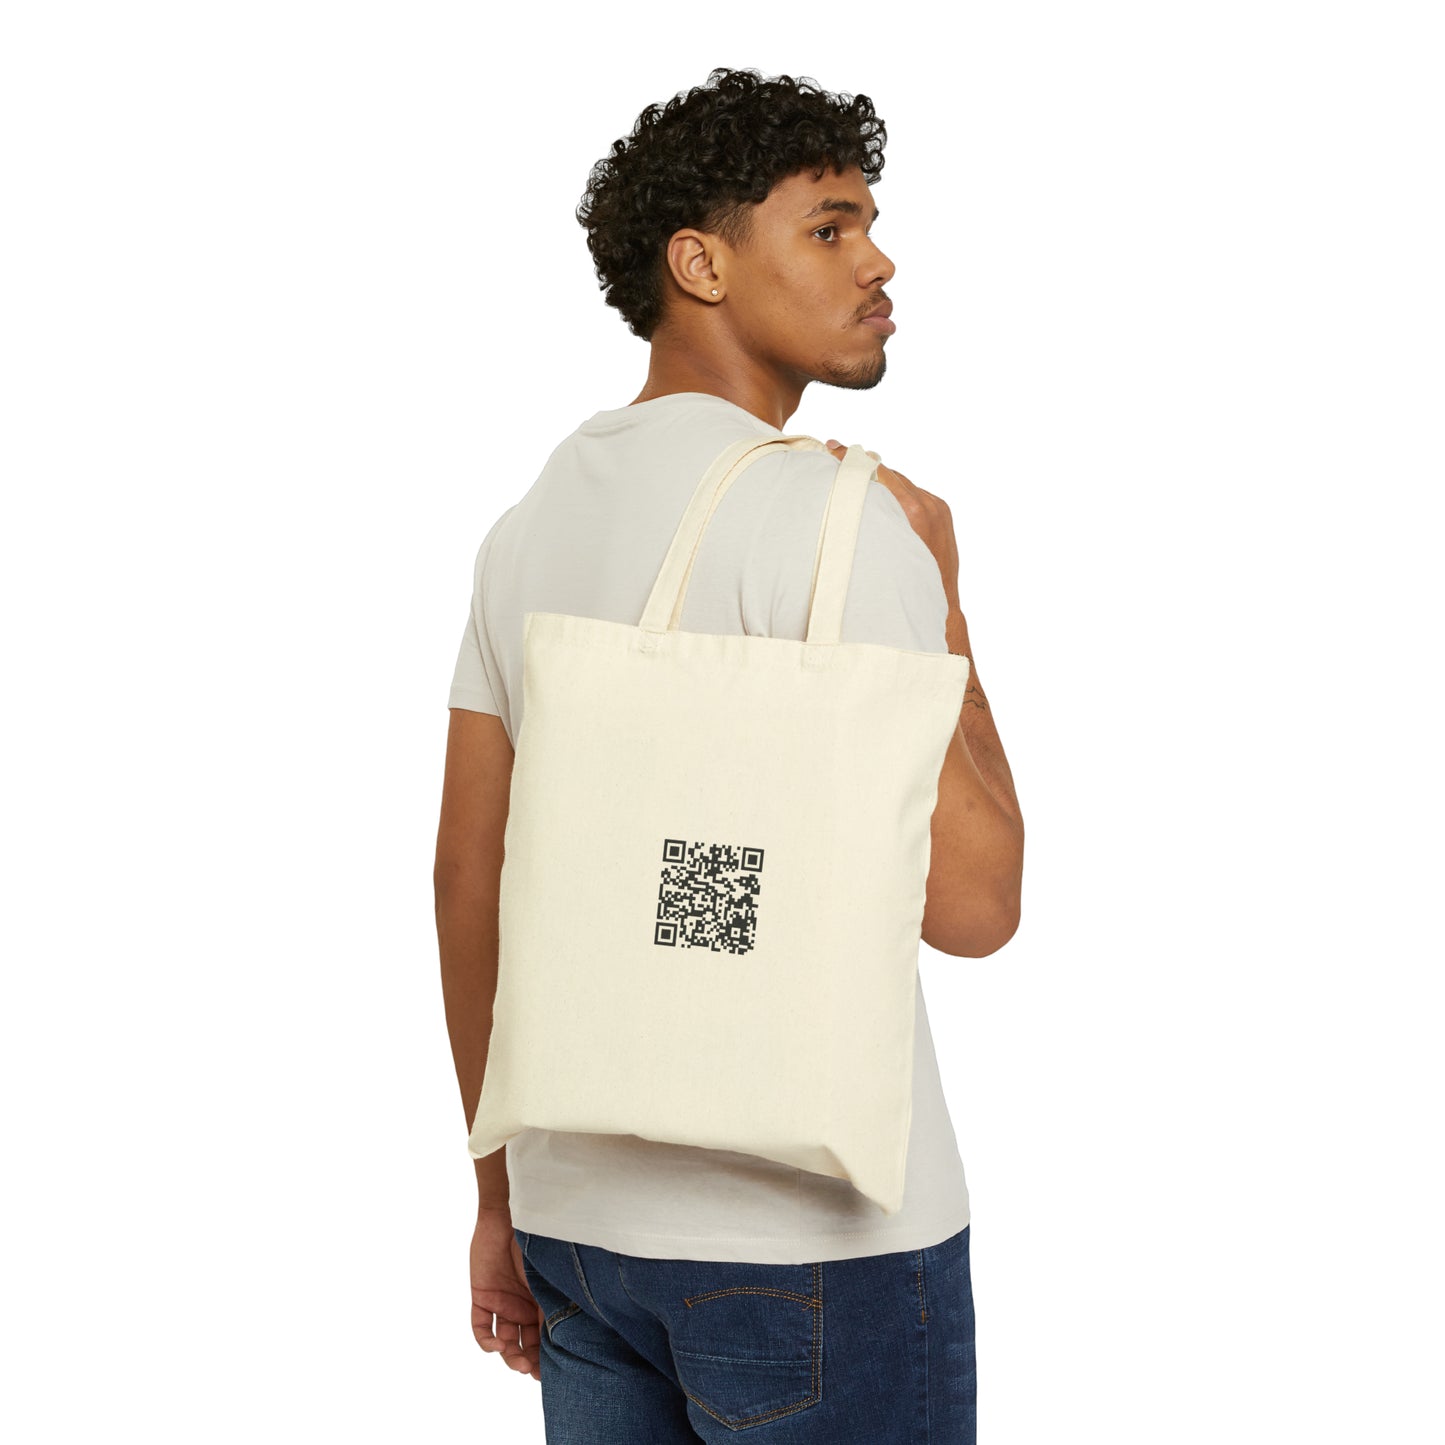 The Time Of The Ghosts - Cotton Canvas Tote Bag